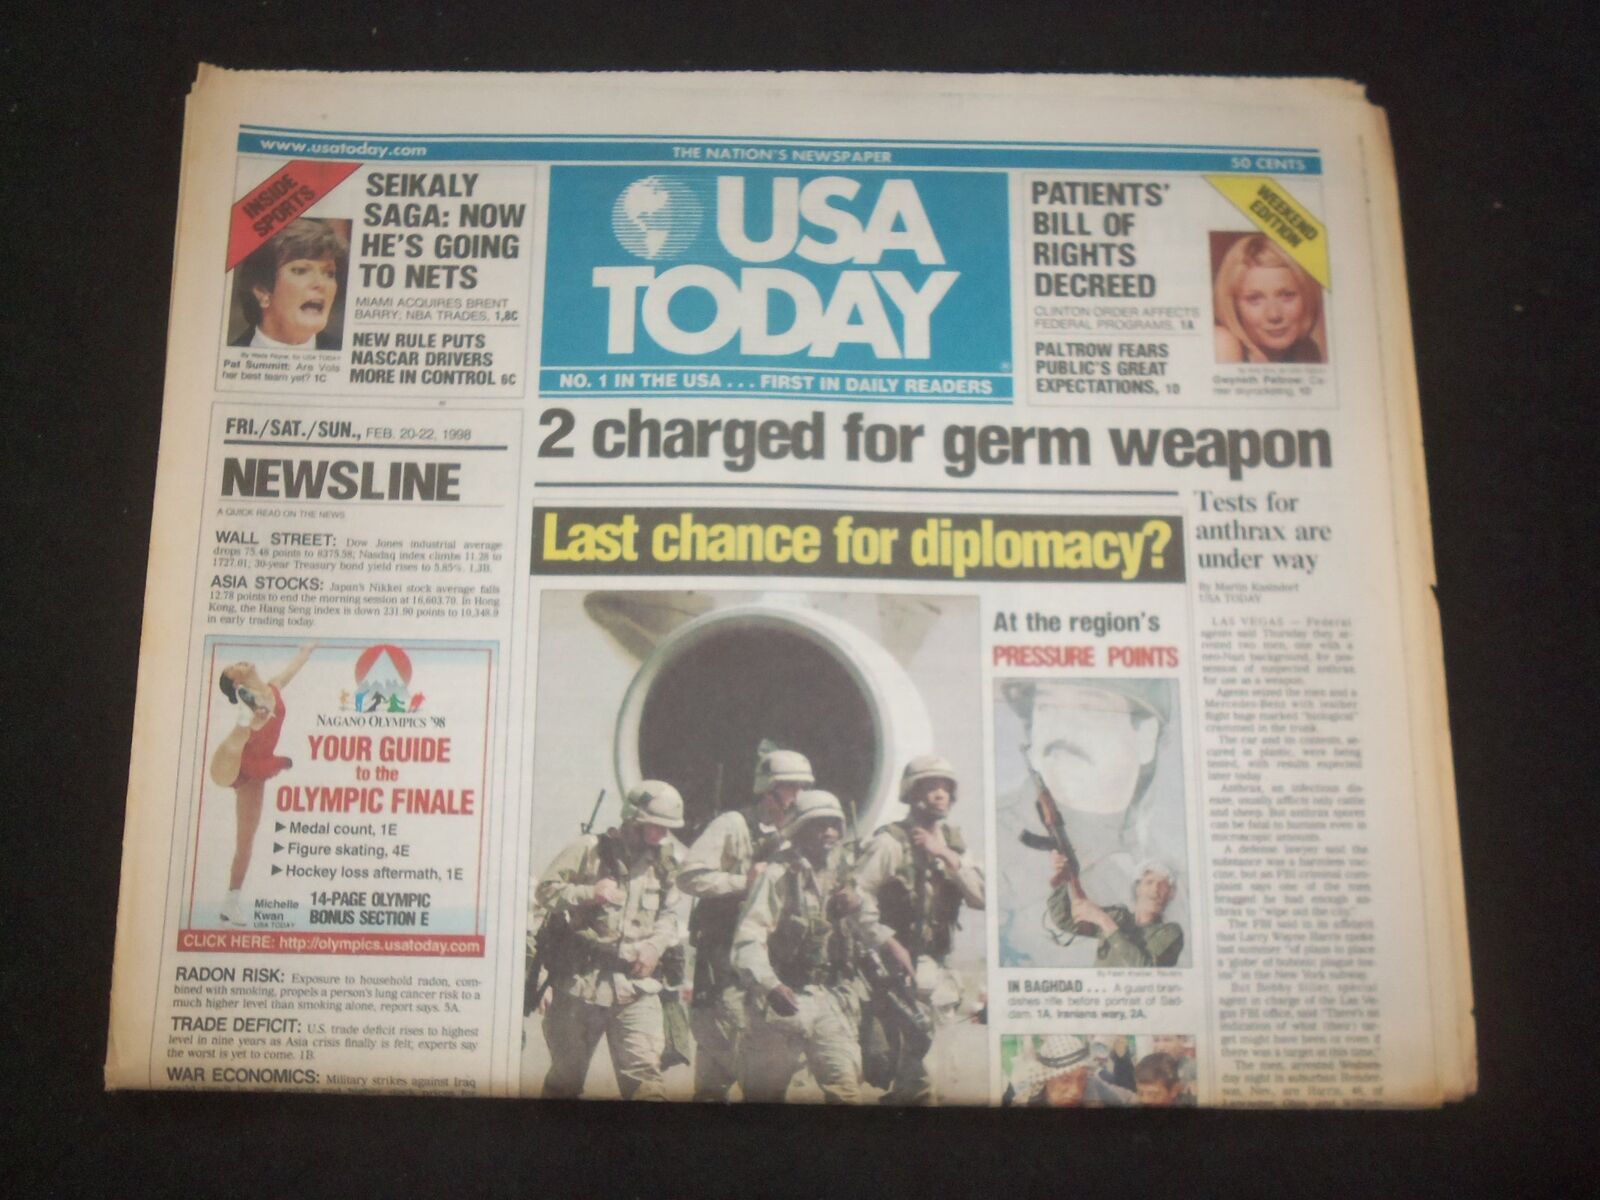 1998 FEBRUARY 20-22 USA TODAY NEWSPAPER - 2 CHARGED FOR ANTHRAX WEAPON - NP 7906